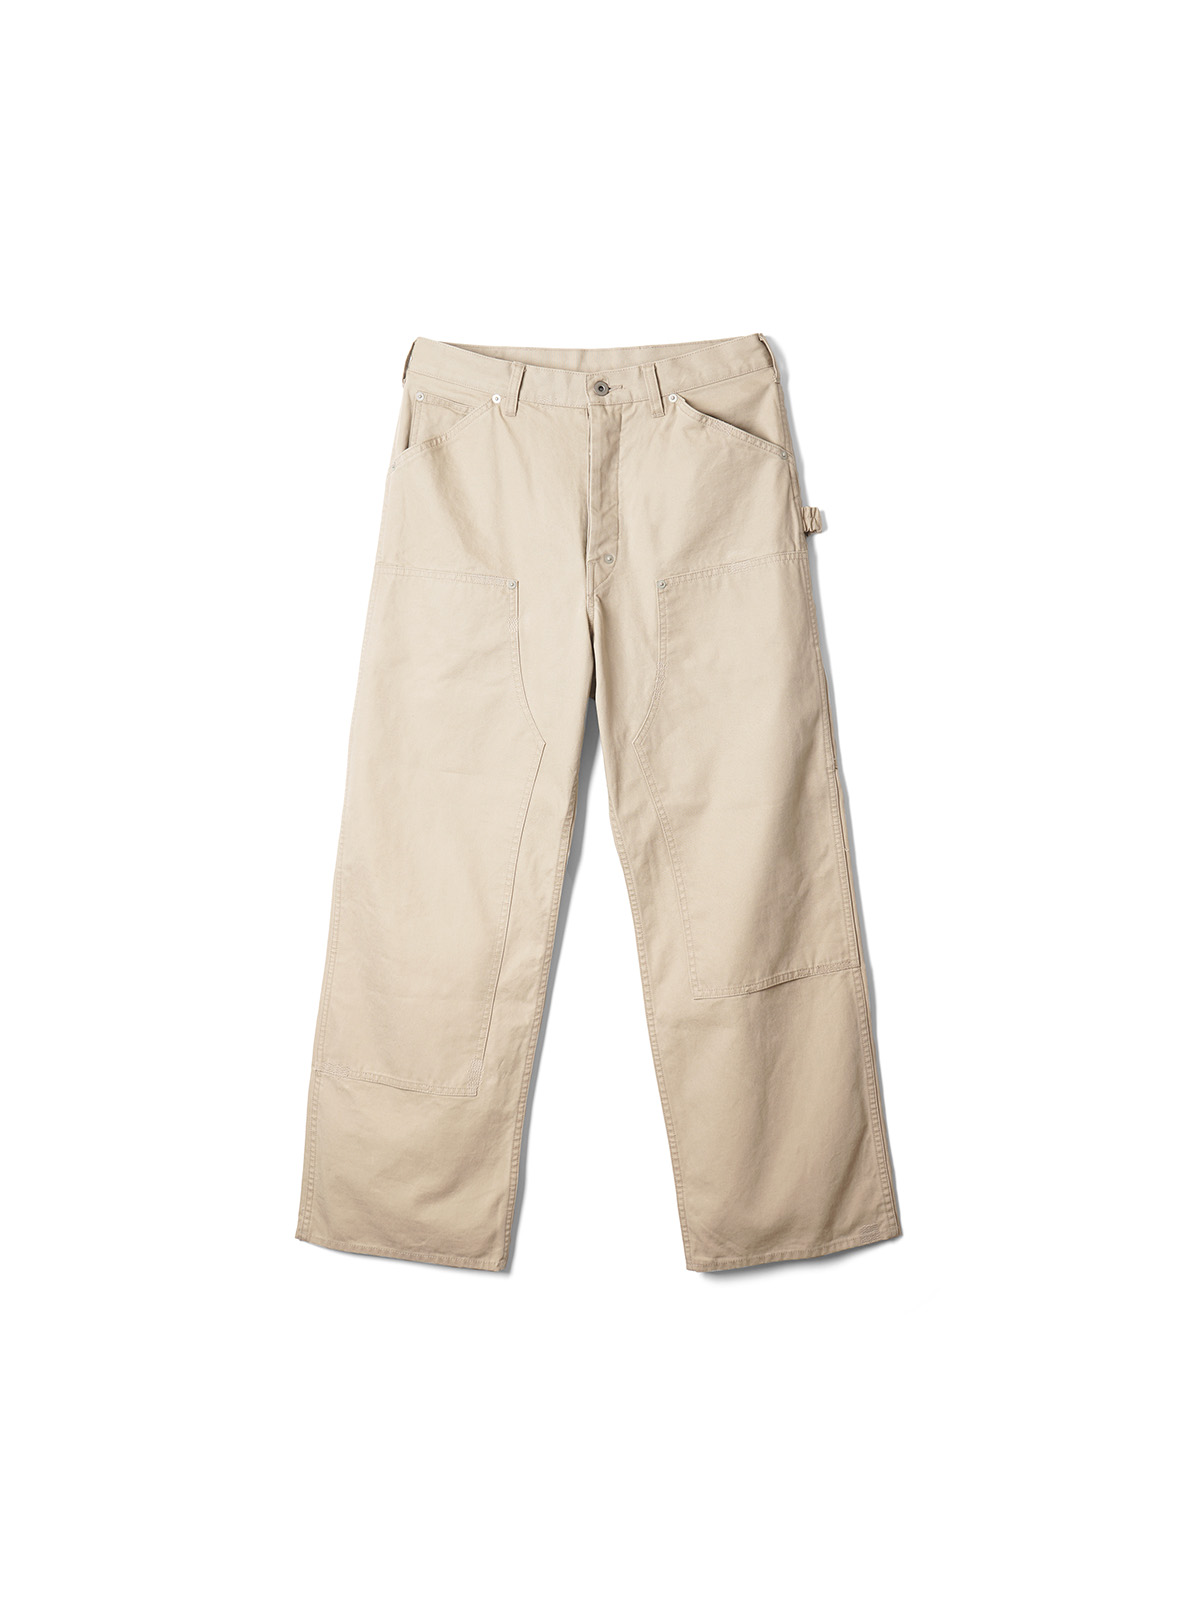 RIGHT HANDED DOUBLE KNEE PANTS (BEIGE)